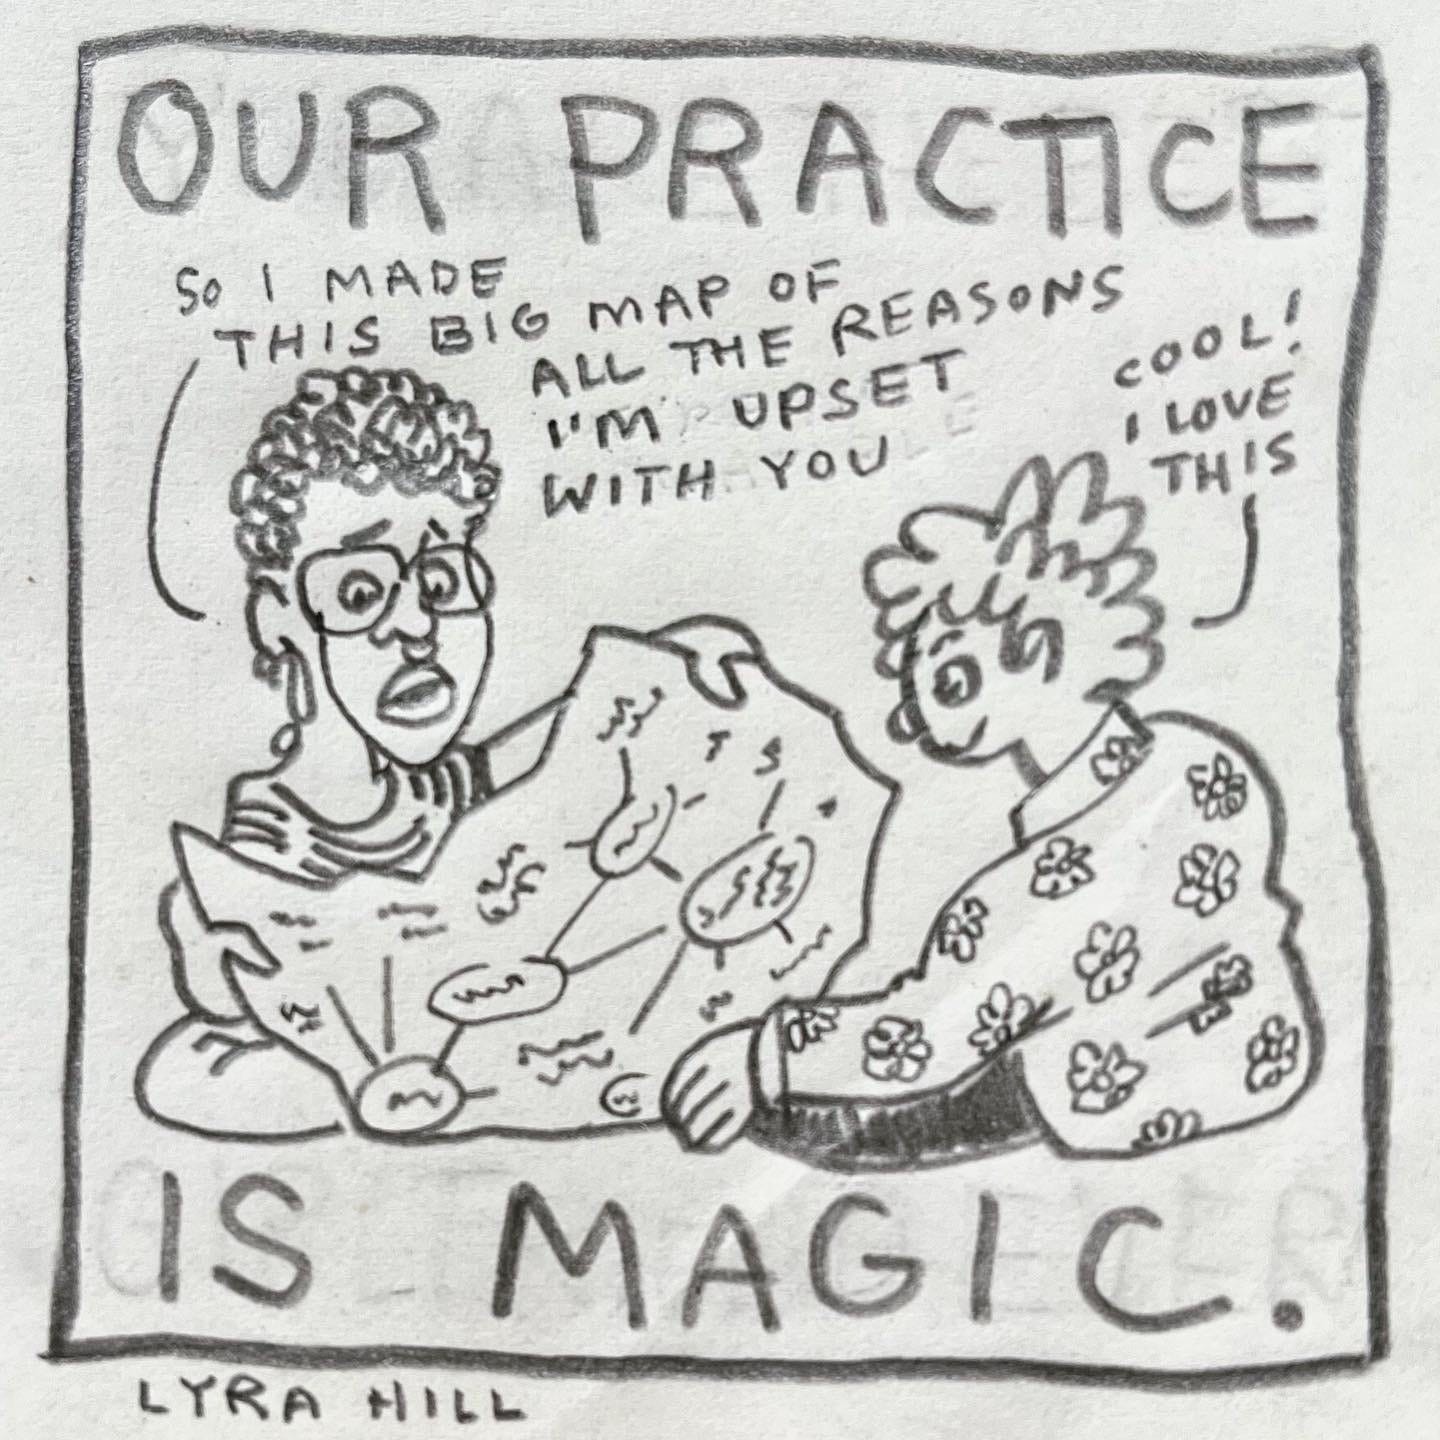 Panel 6: our practice is magic. Image: Maze and Lark sit cross legged on the floor. Maze is opening a giant piece of paper with circles, lines and text drawn all over it. They look nervous, saying "so I made this big map of all the reasons I'm upset with you." Looking at the map and smiling, Lark responds ”cool! I love this"